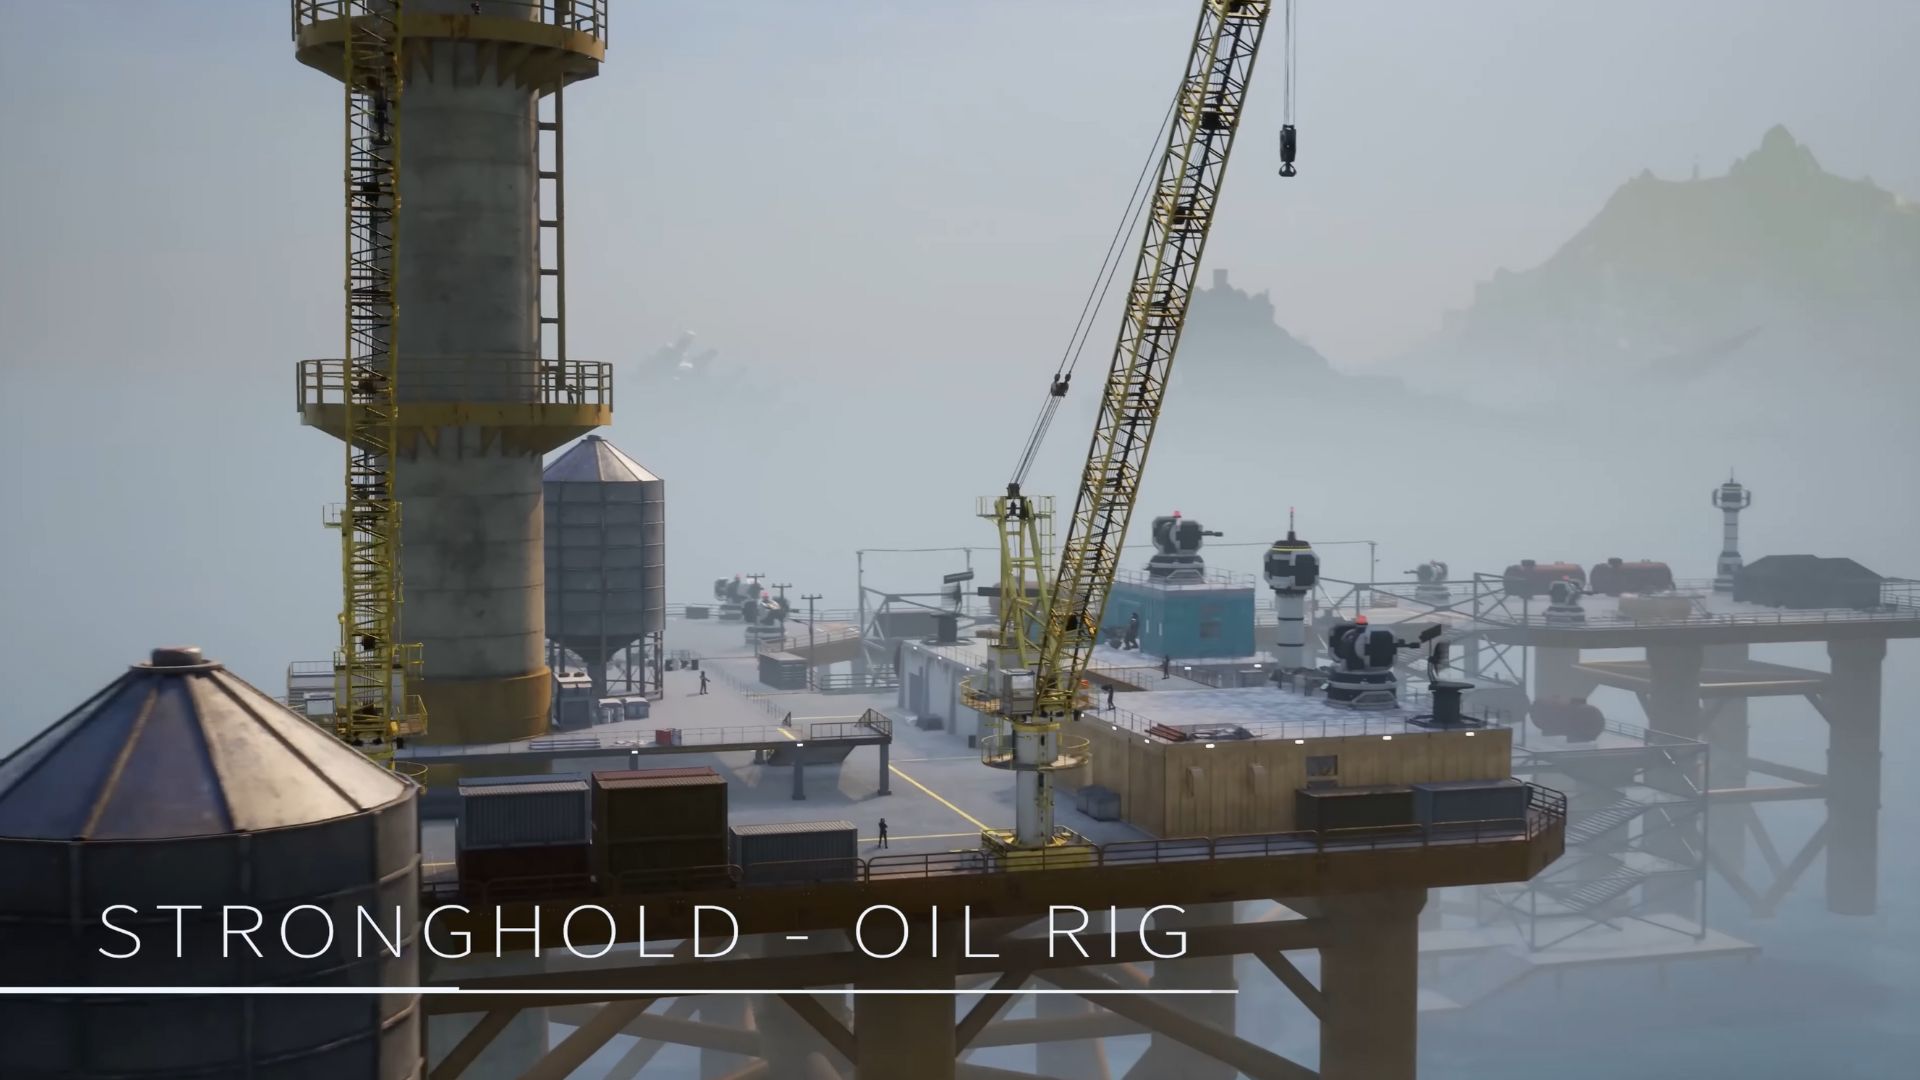 The Oil Rig Stronghold